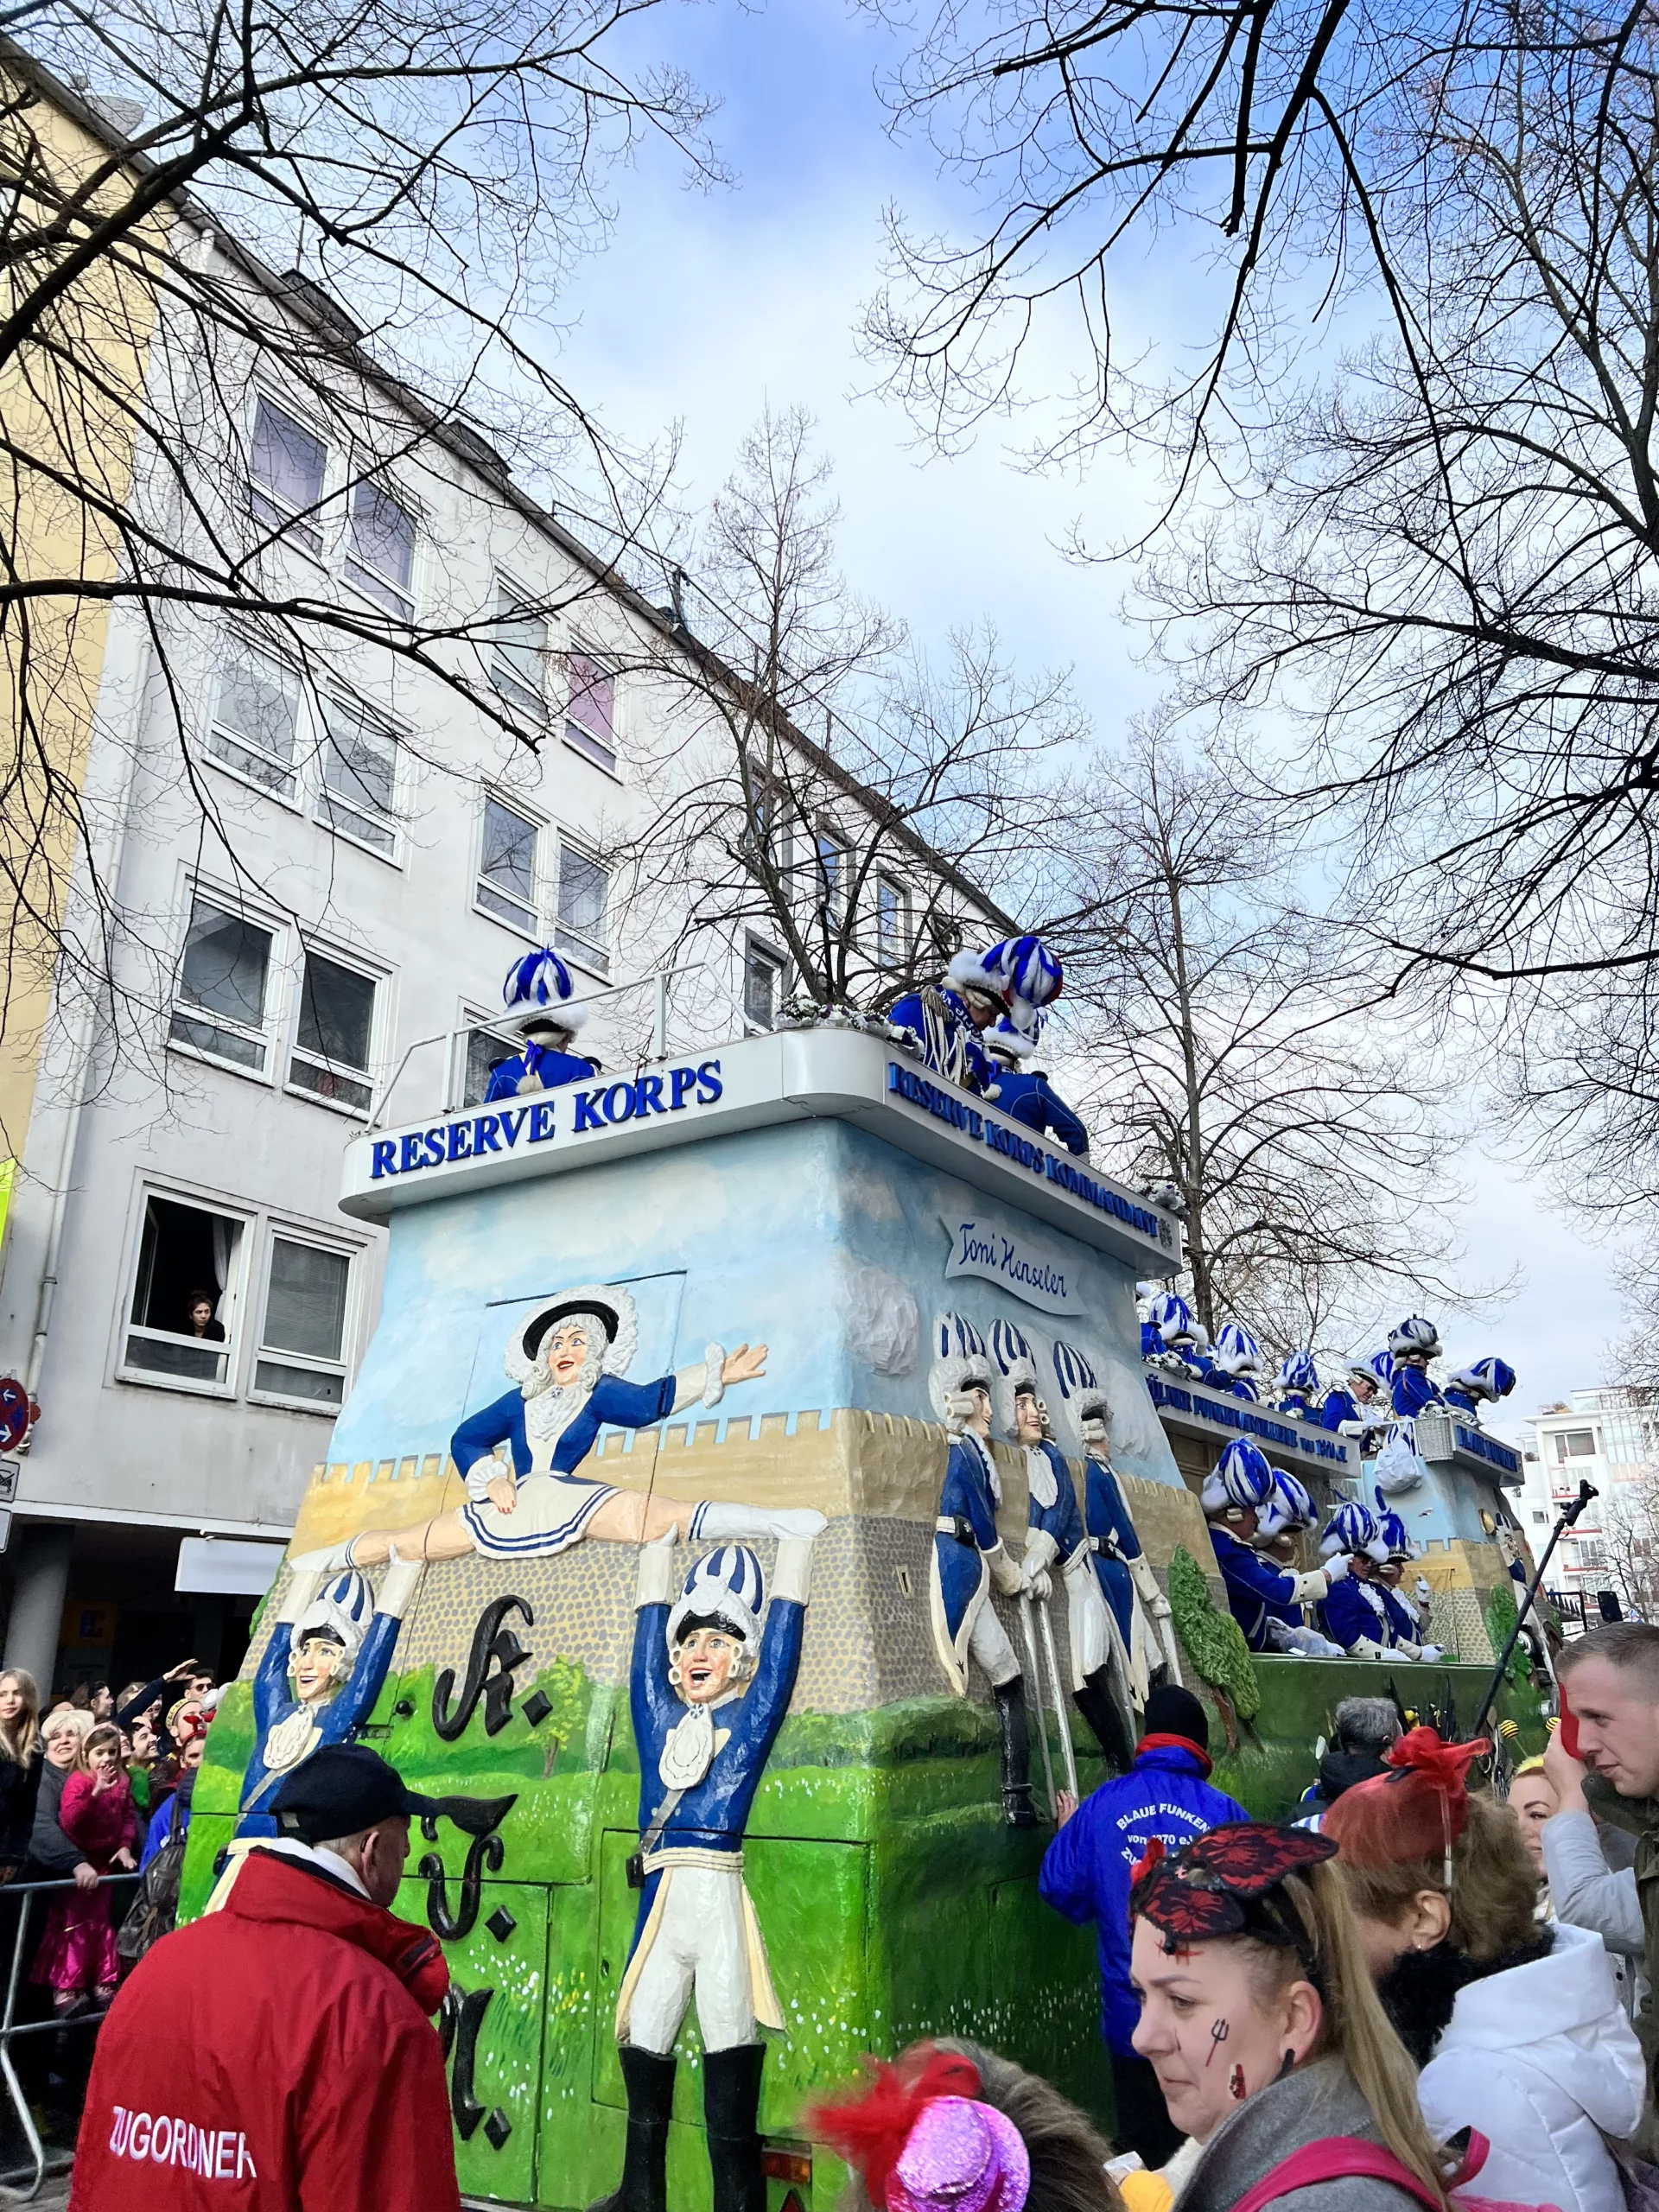 Carnival in Cologne - a float from the Rosenmontag parade